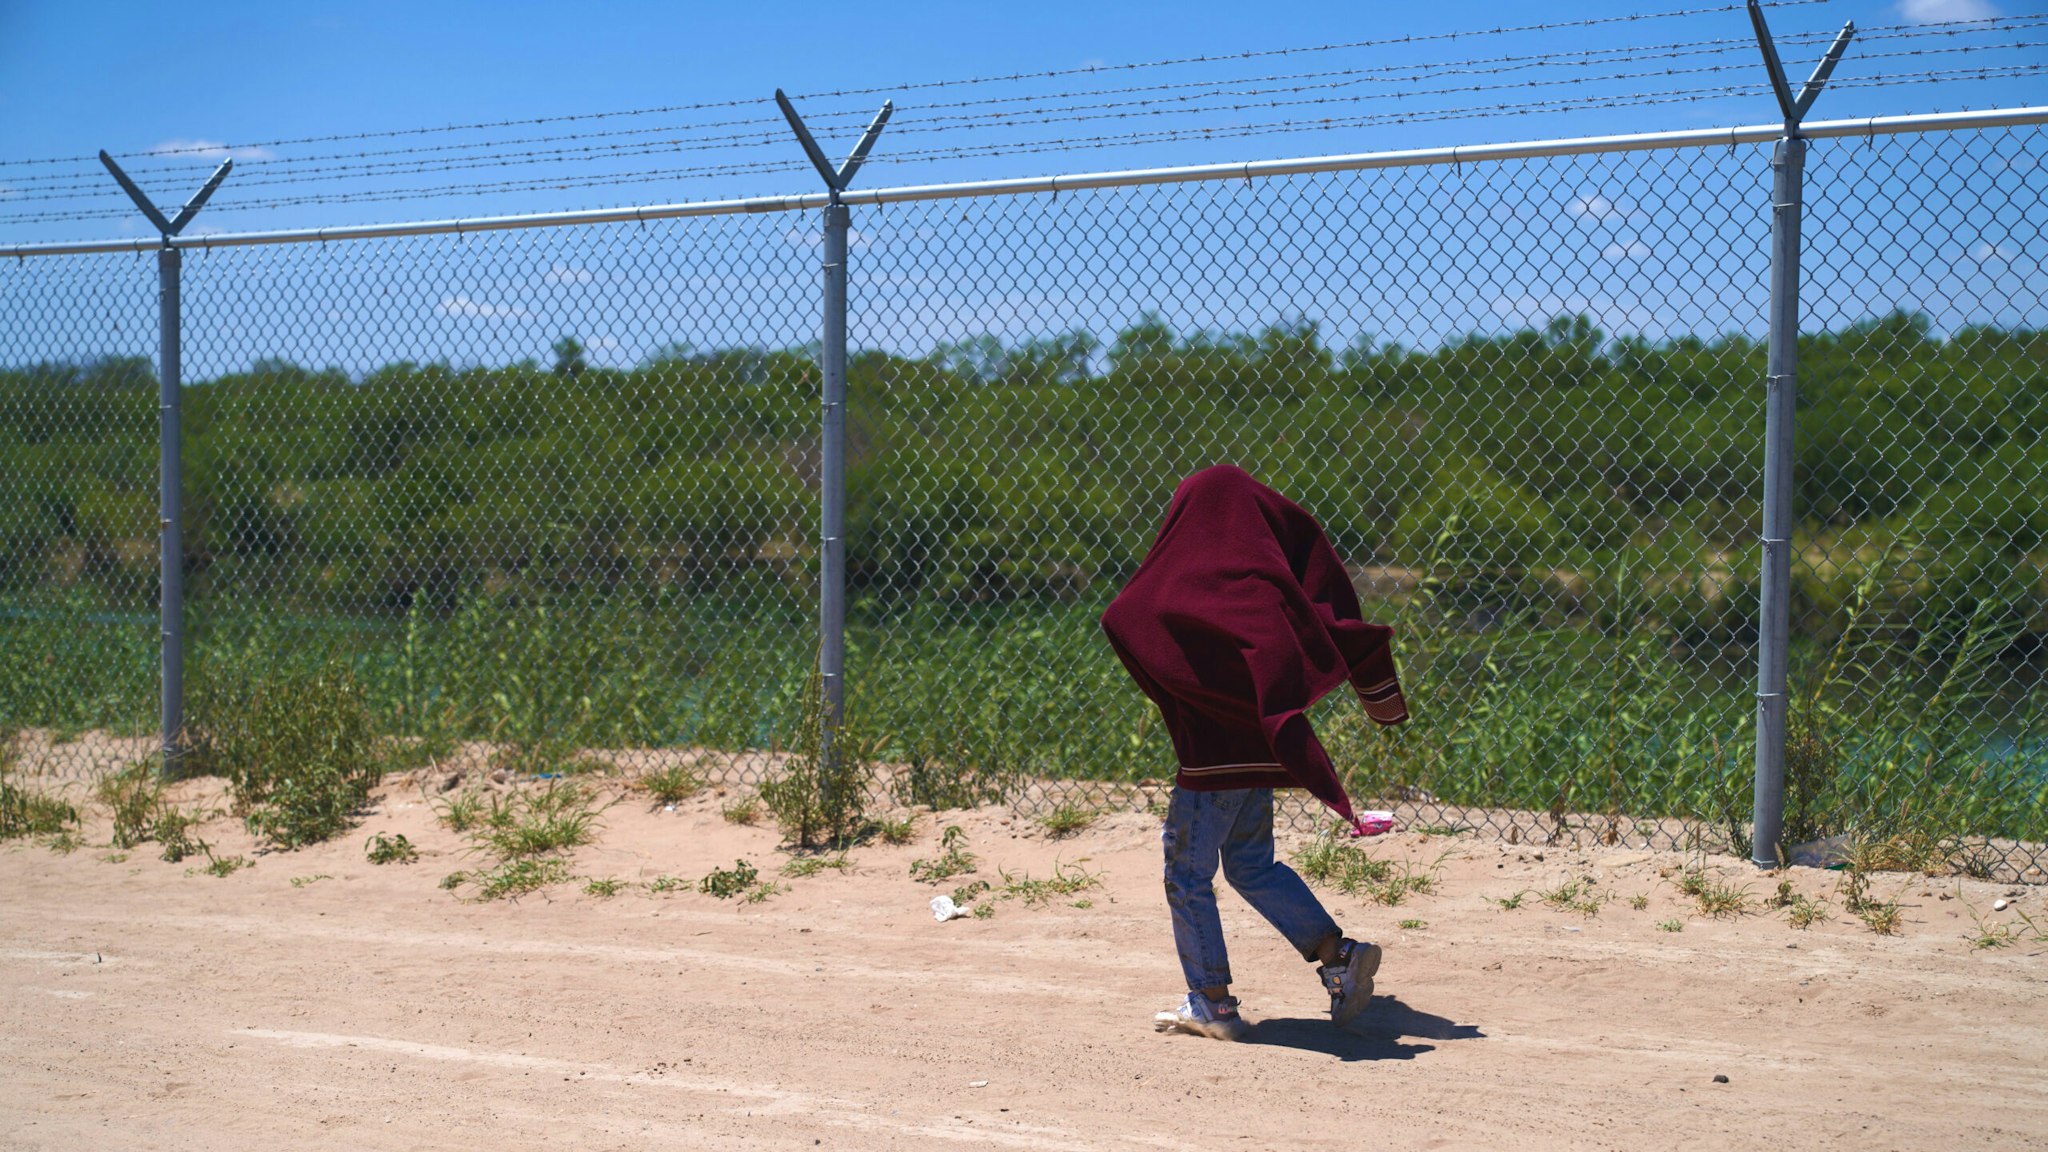 TEXAS, UNITED STATES - JULY 26: A migrant child walks by a fence towards U.S. Border Patrol after illegally crossing into Eagle Pass, Texas U.S. from Mexico on Tuesday July 26, 2022.